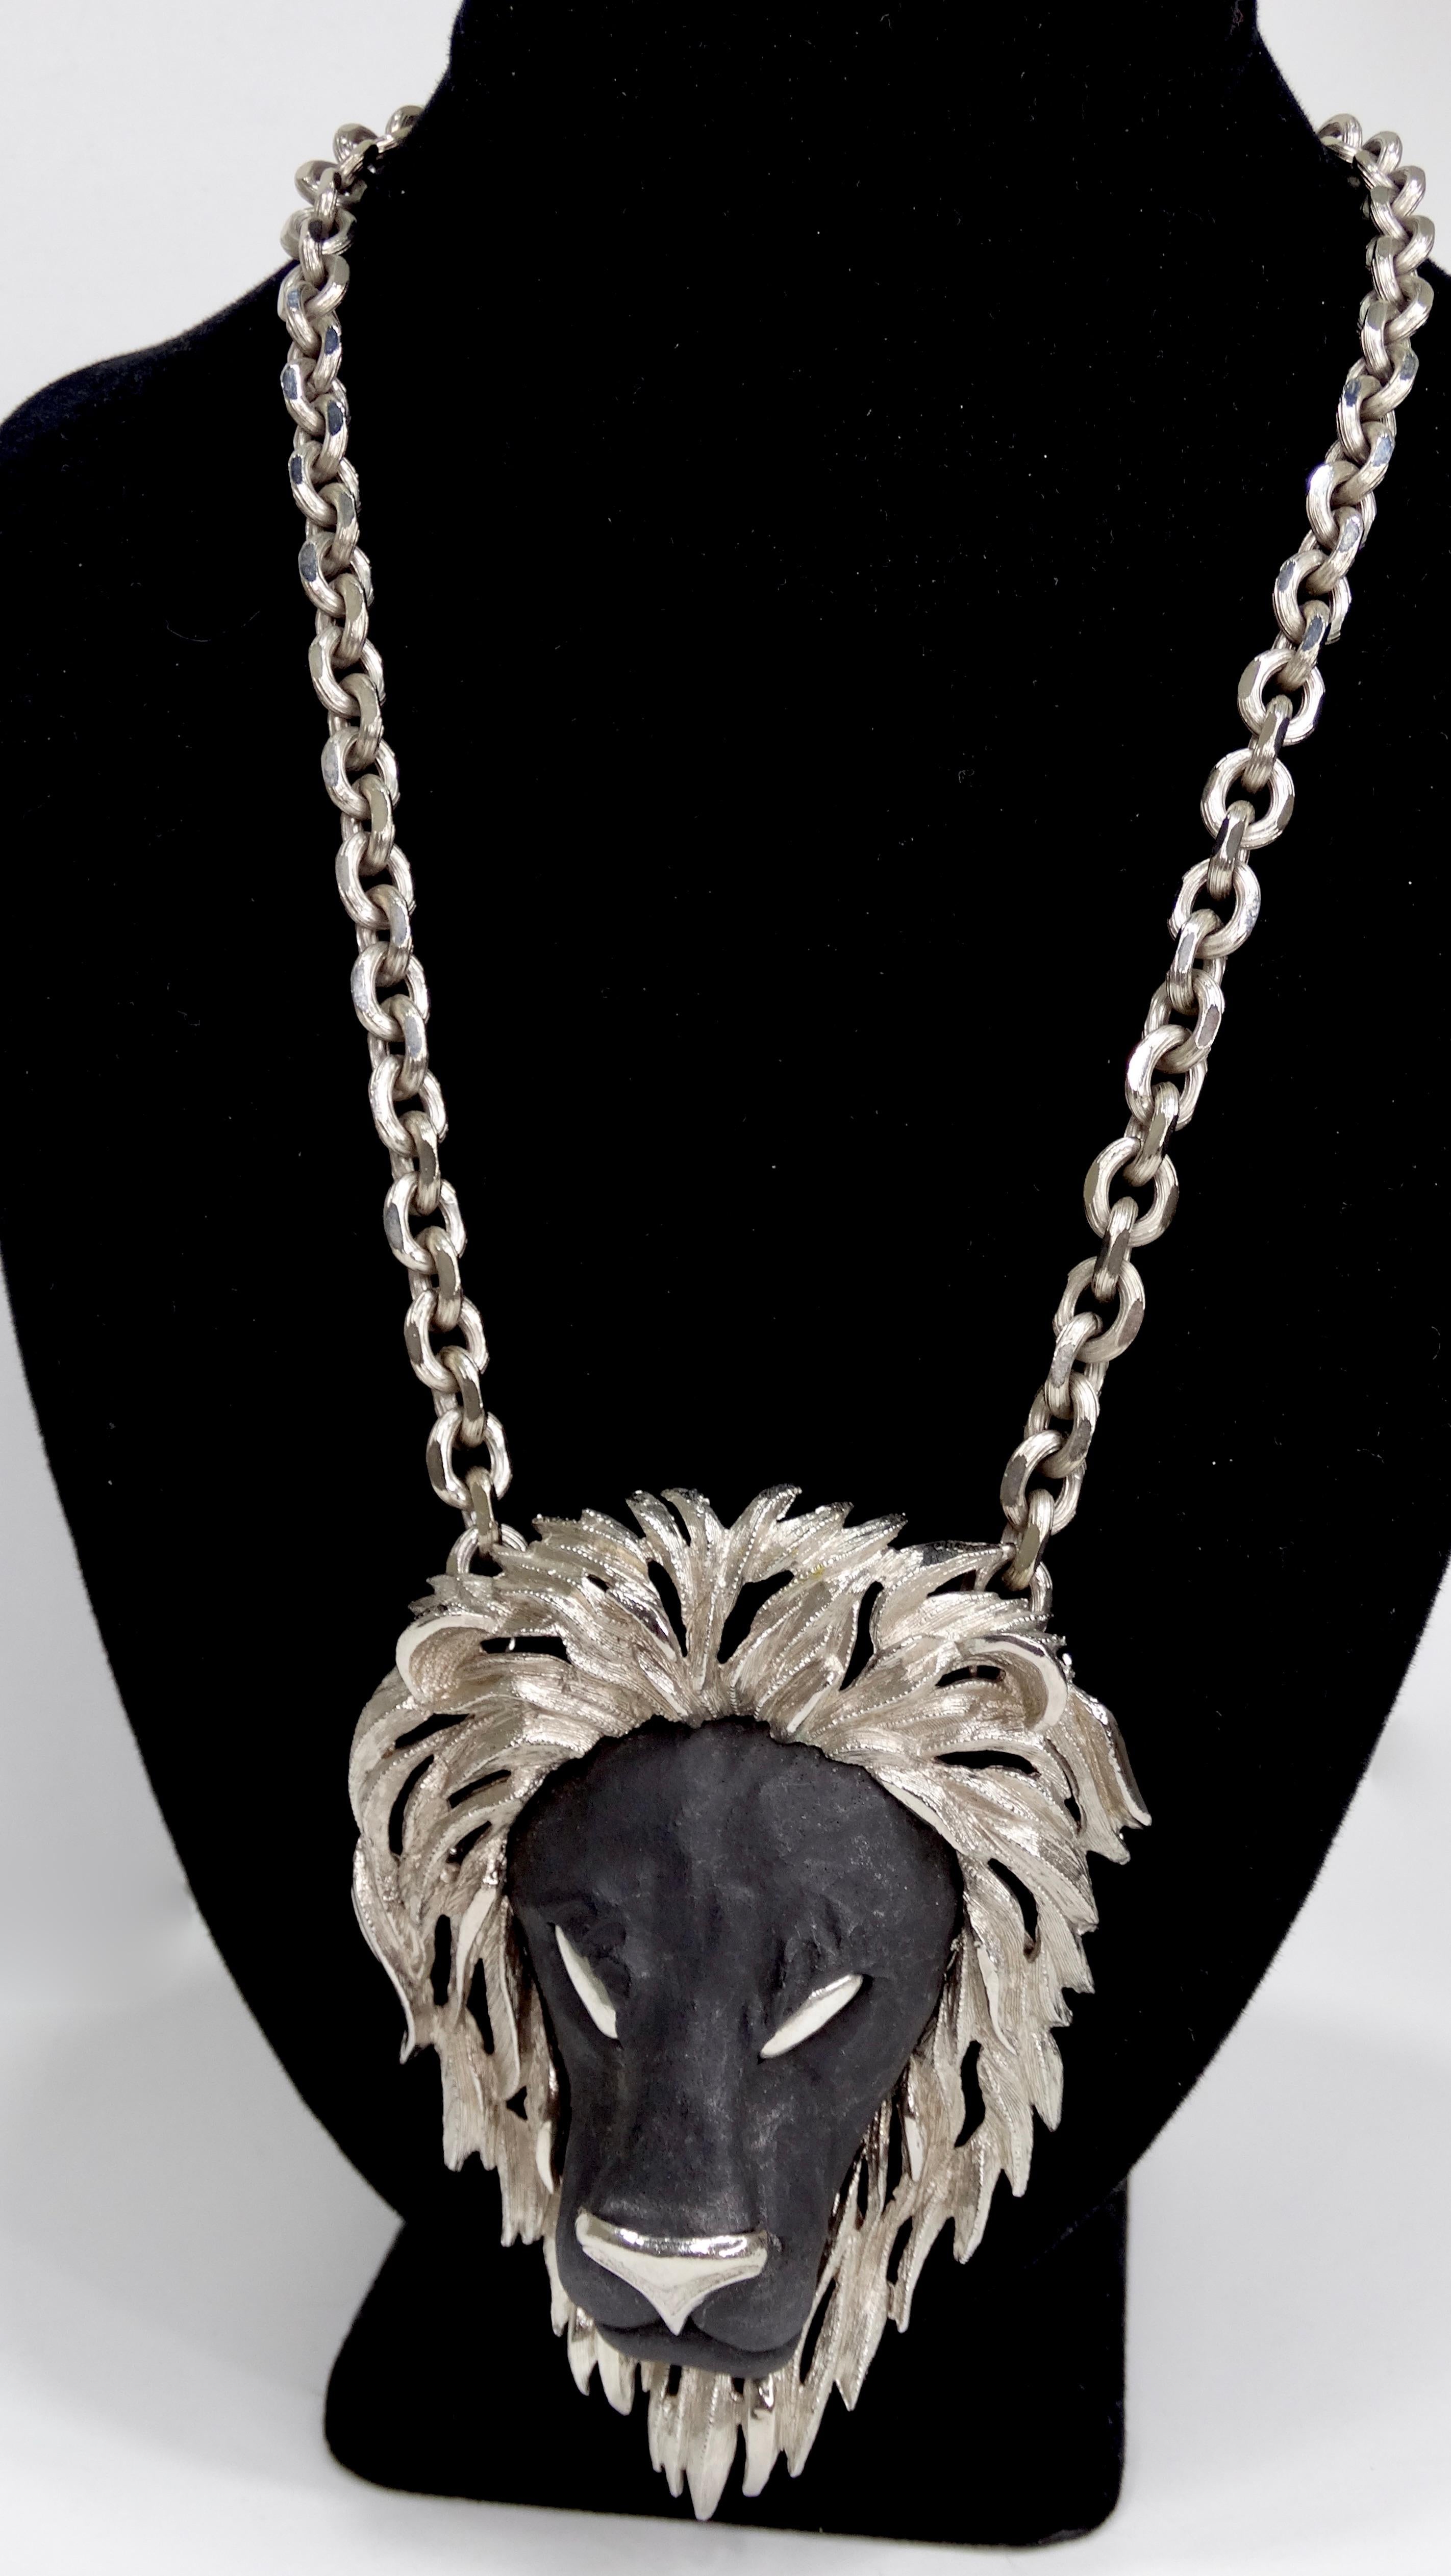 The perfect statement necklace! Circa 1970s, this Razza necklace features silver toned hardware and a large black resin lion pendant. Timeless and a true vintage piece, this necklace is perfect to pair with your favorite Oscar de la Renta kaftan or